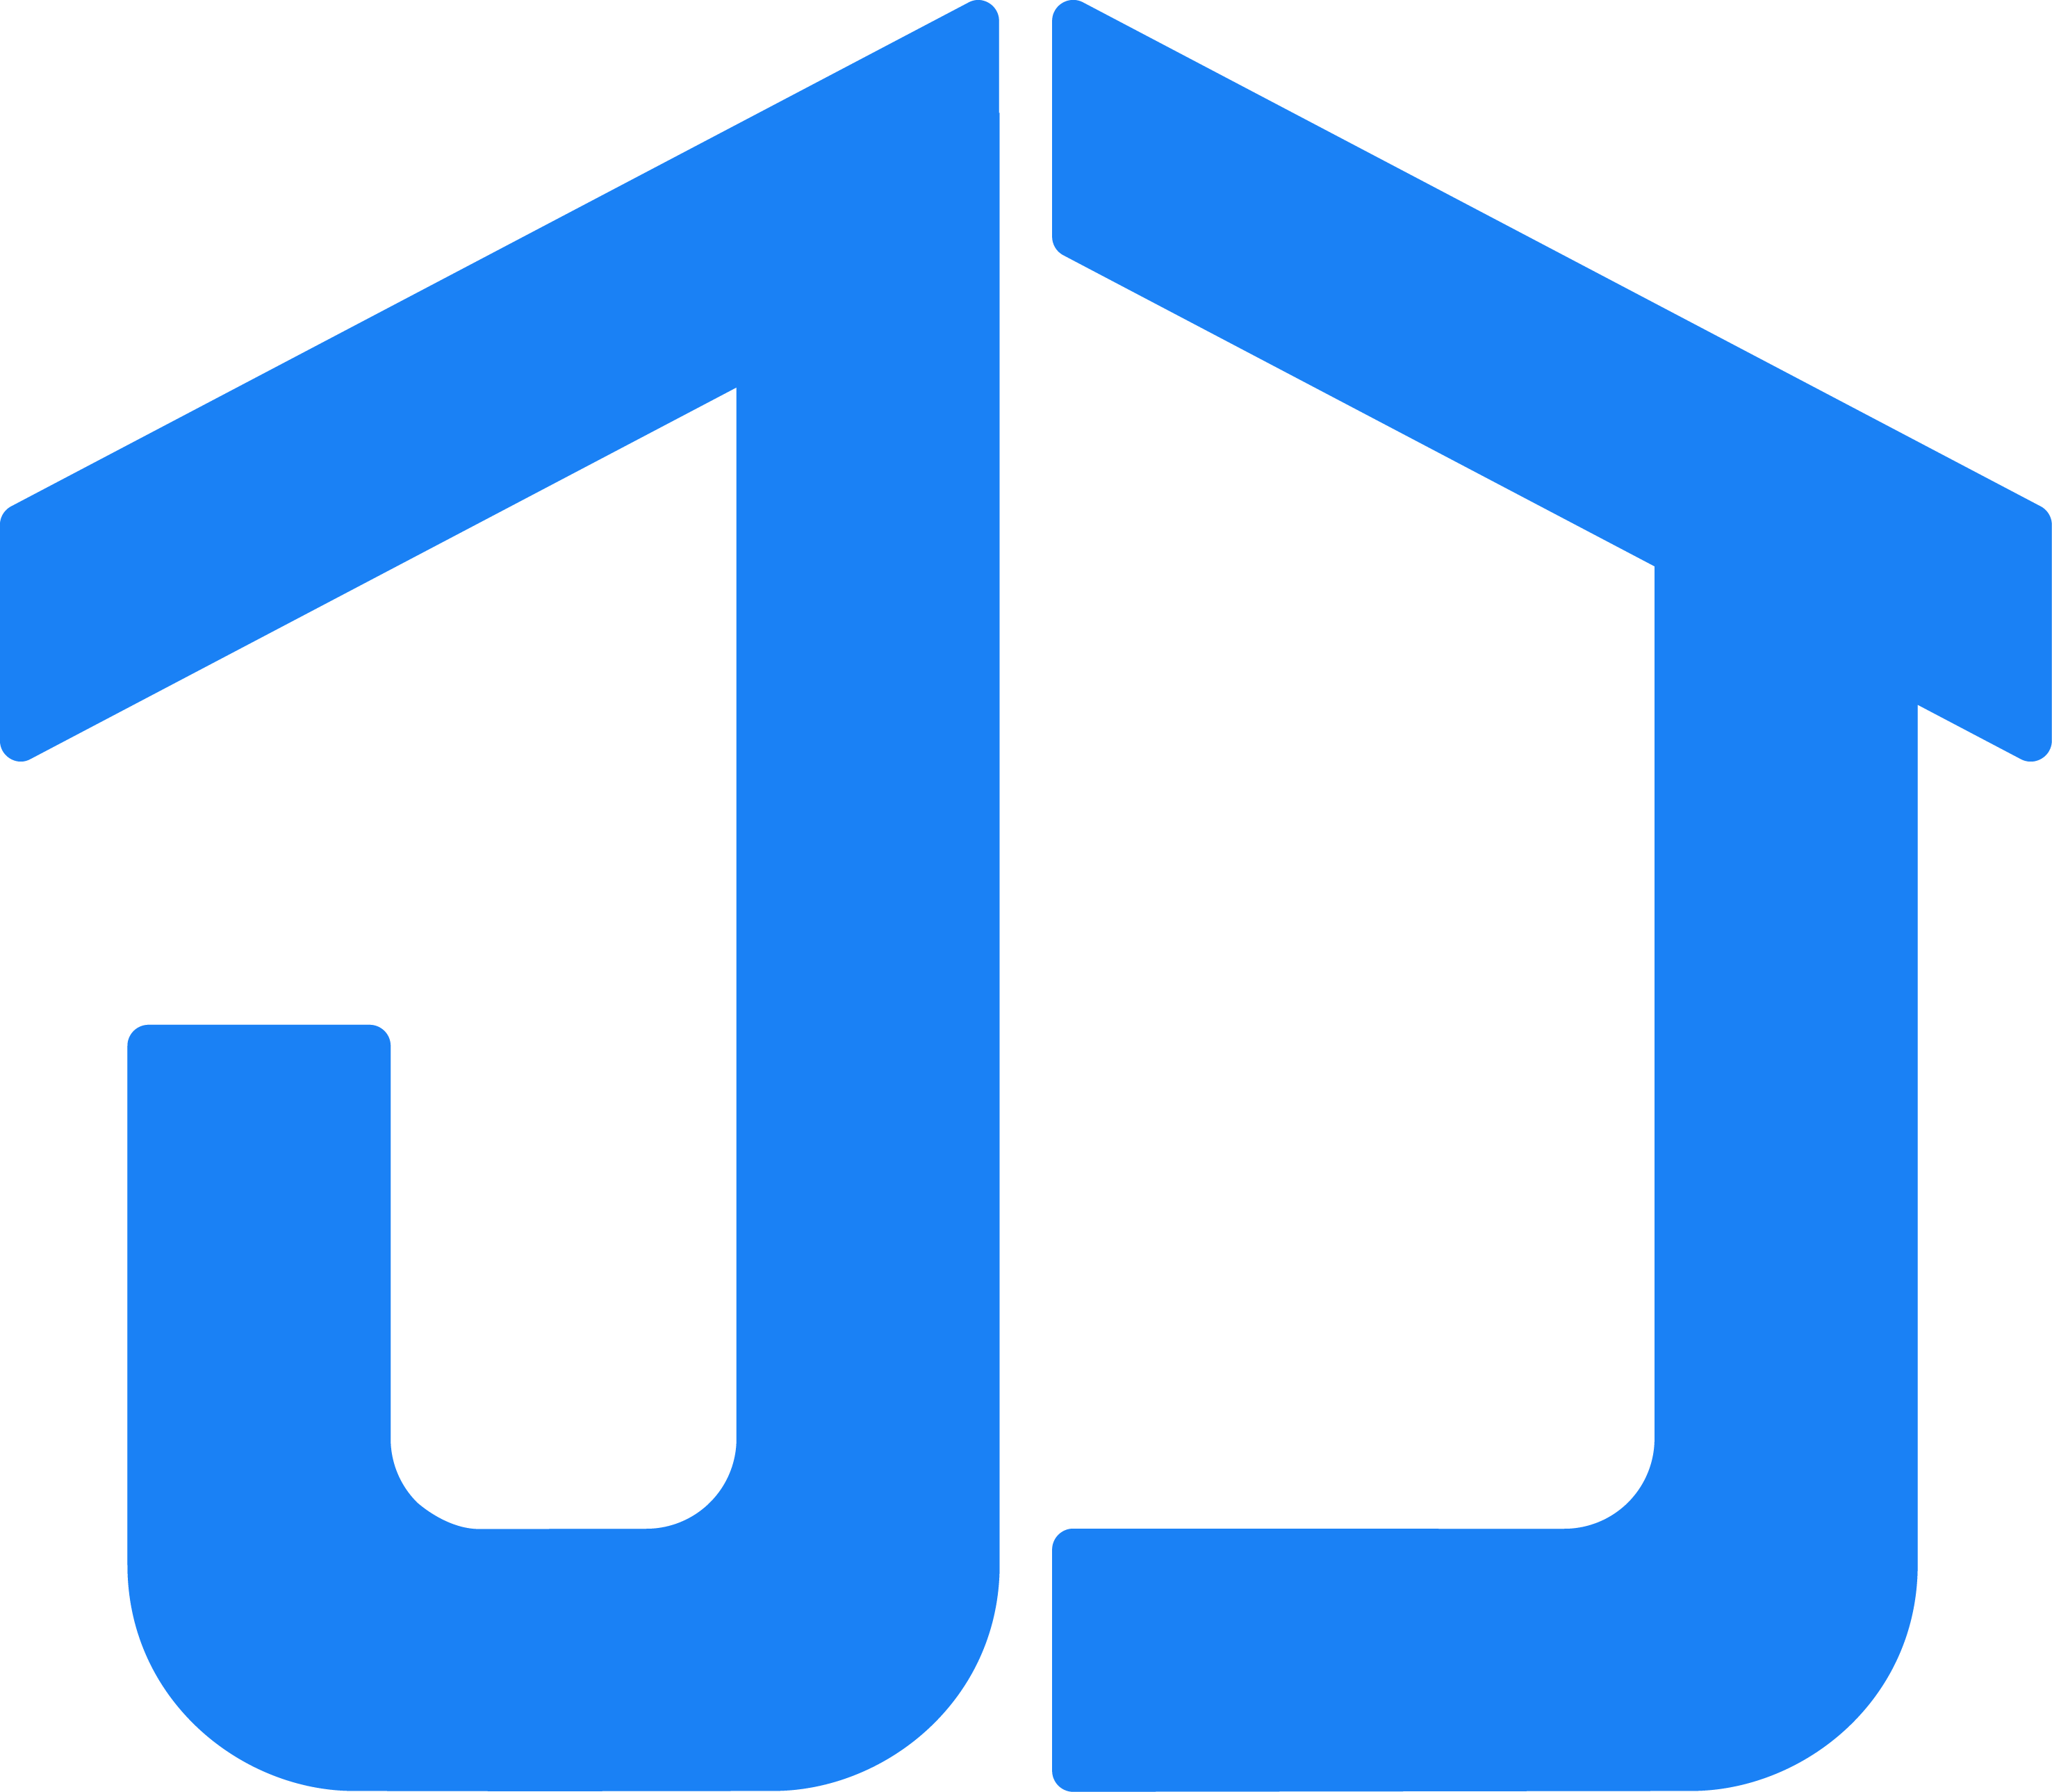 JJ Quality Builders Brandmark, two jjs that form the shape of a roof